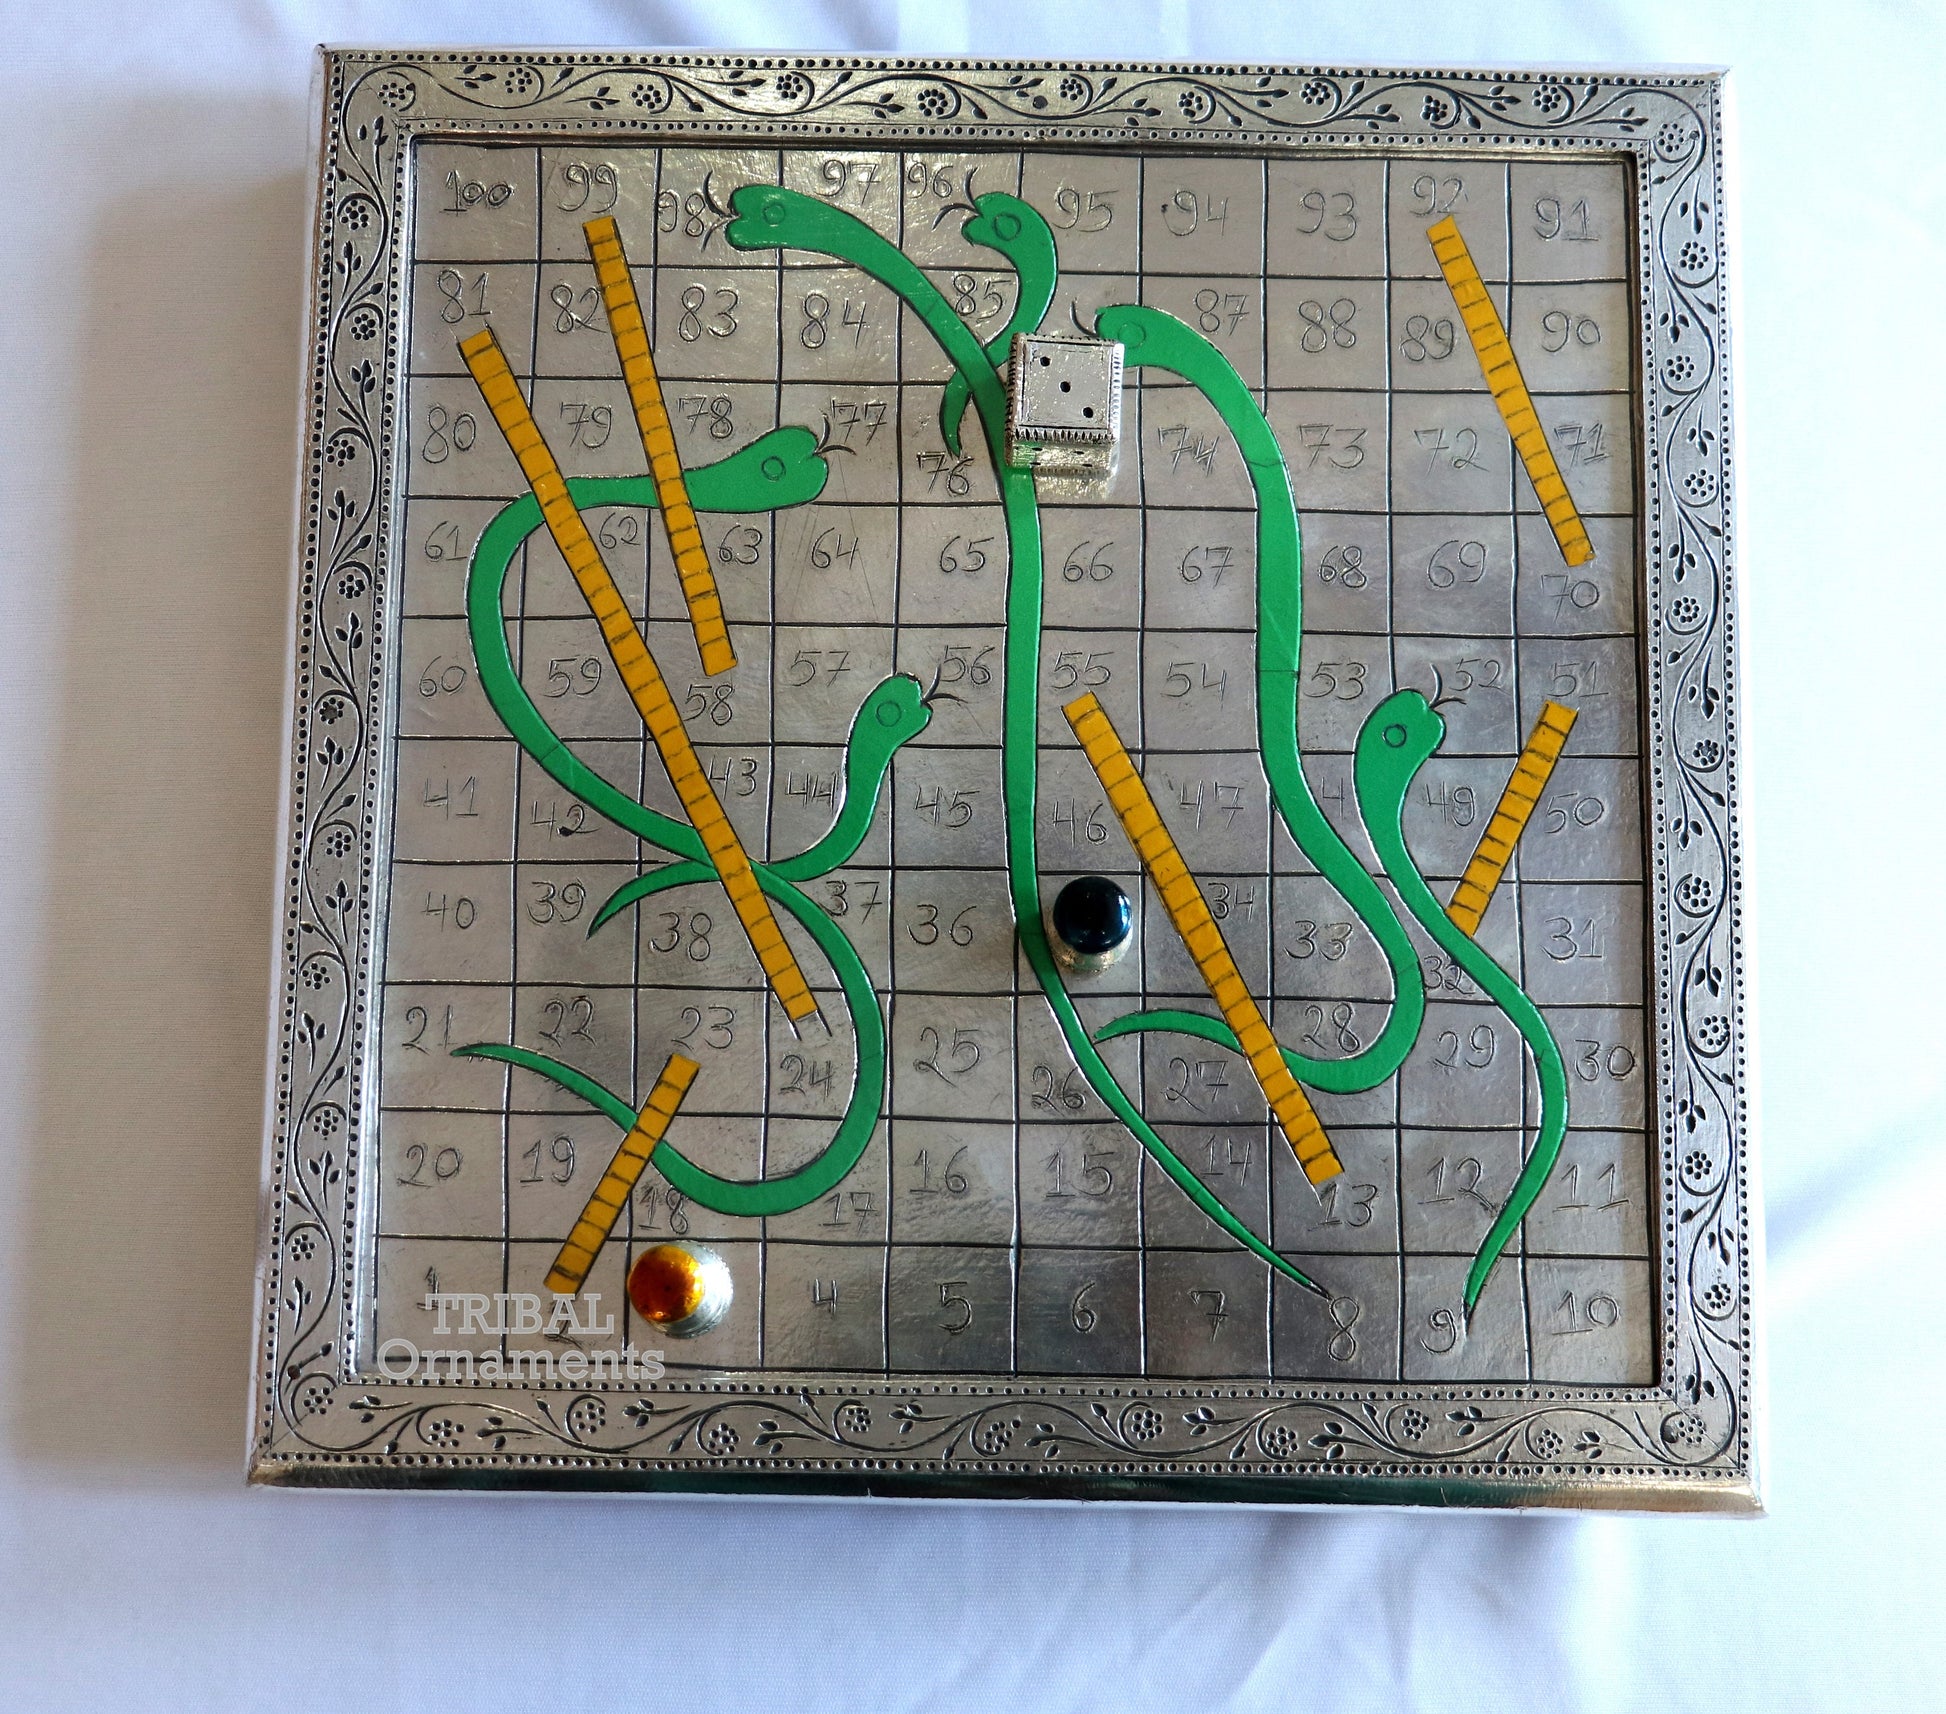 925 sterling silver handcrafted solid silver work snake and ladders game wooden base board, amazing vintage style classical games sf16 - TRIBAL ORNAMENTS